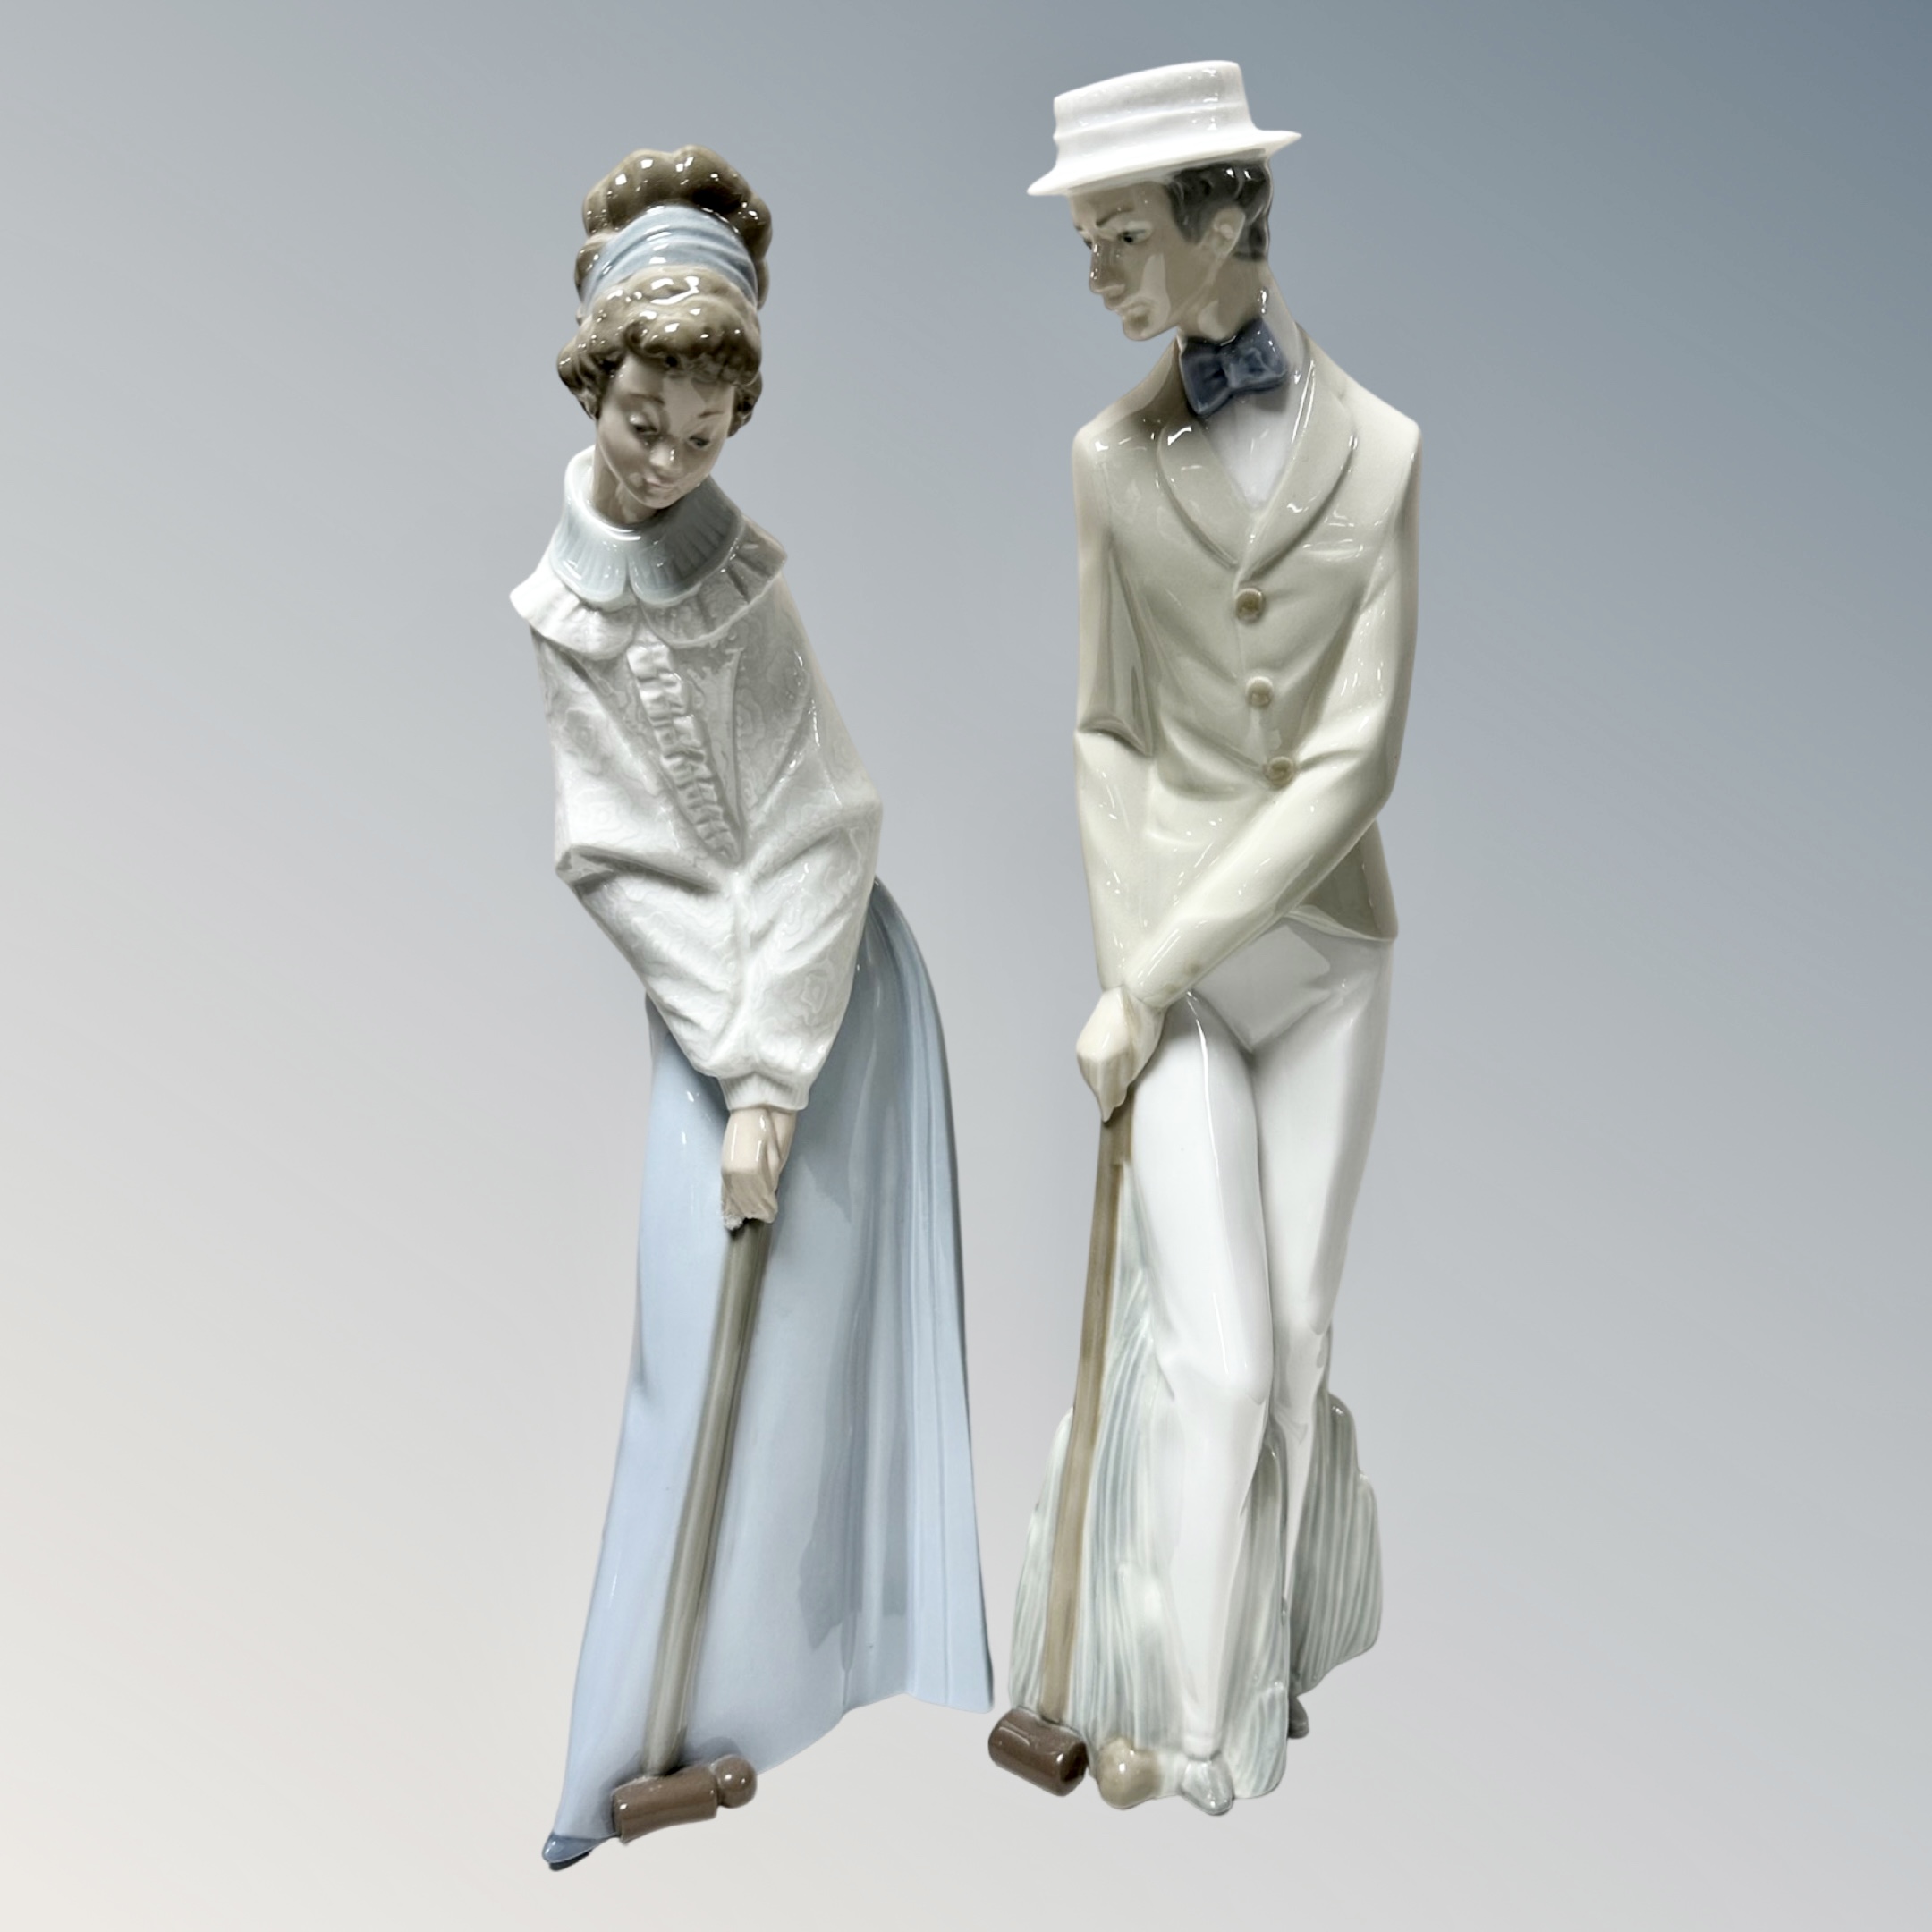 Two Nao figures of Croquet players